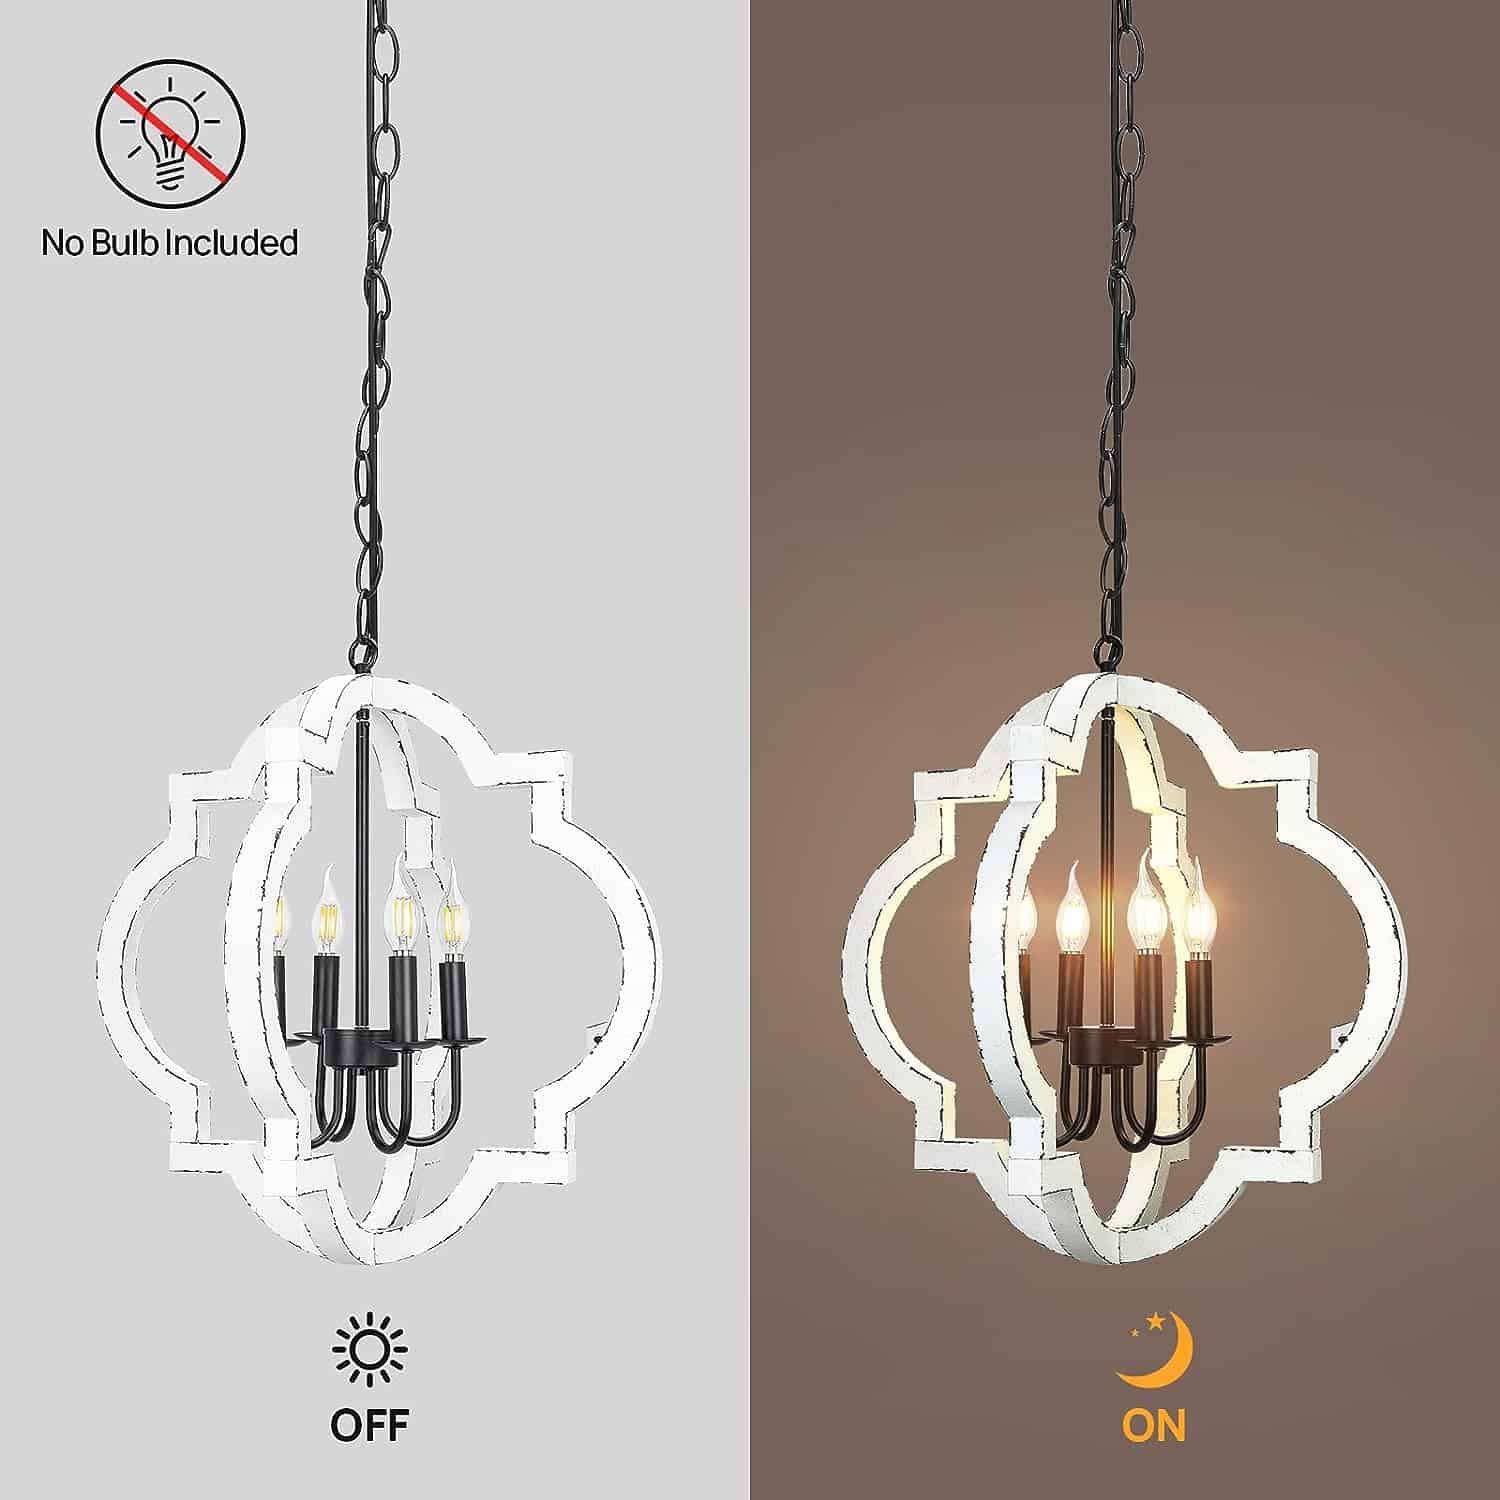 21.7 Farmhouse Wood Chandelier Light Fixture 4Light Handmade Distressed White Geometric Hanging Pendant Lighting for Dining Room Kitchen Island Entryway stairwell Colour White 4